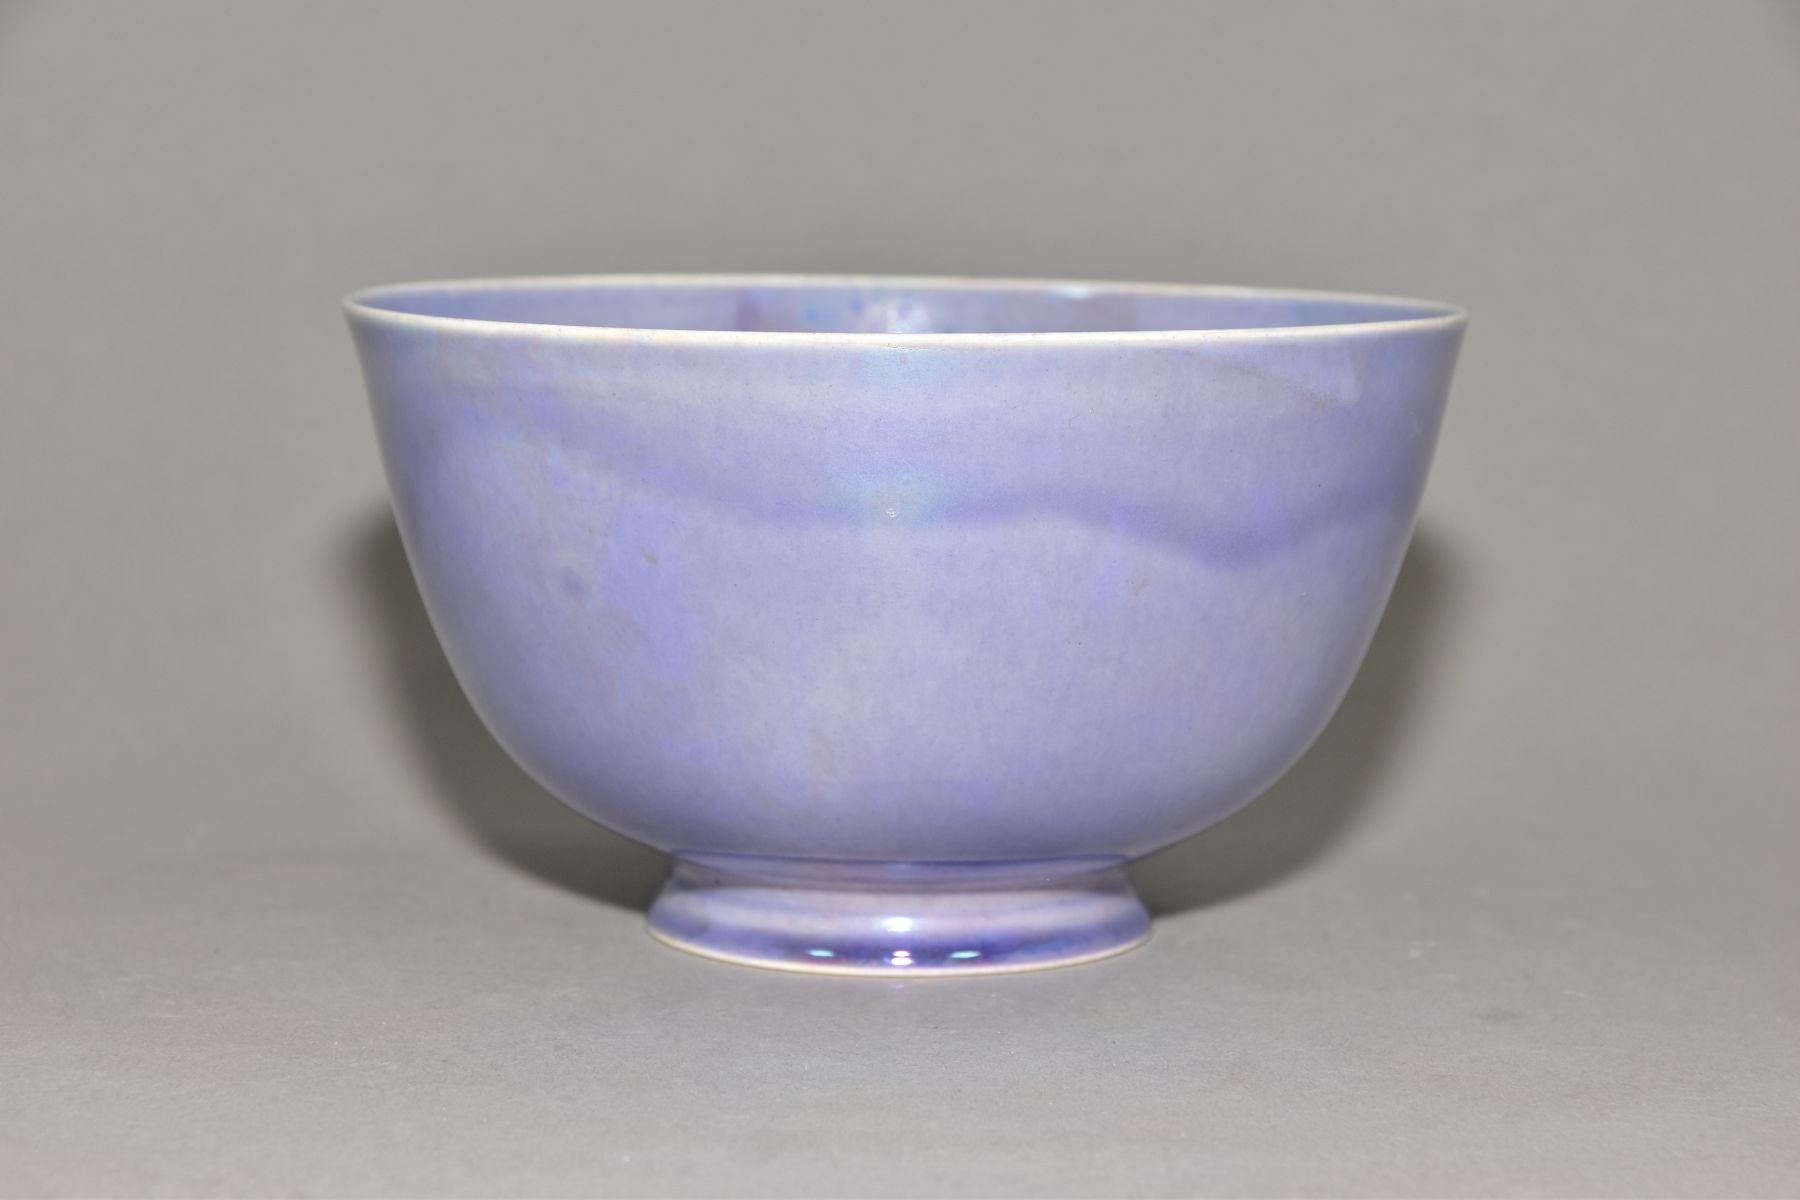 RUSKIN POTTERY, a footed eggshell bowl, covered in a lavender lustre glaze, impressed Ruskin England